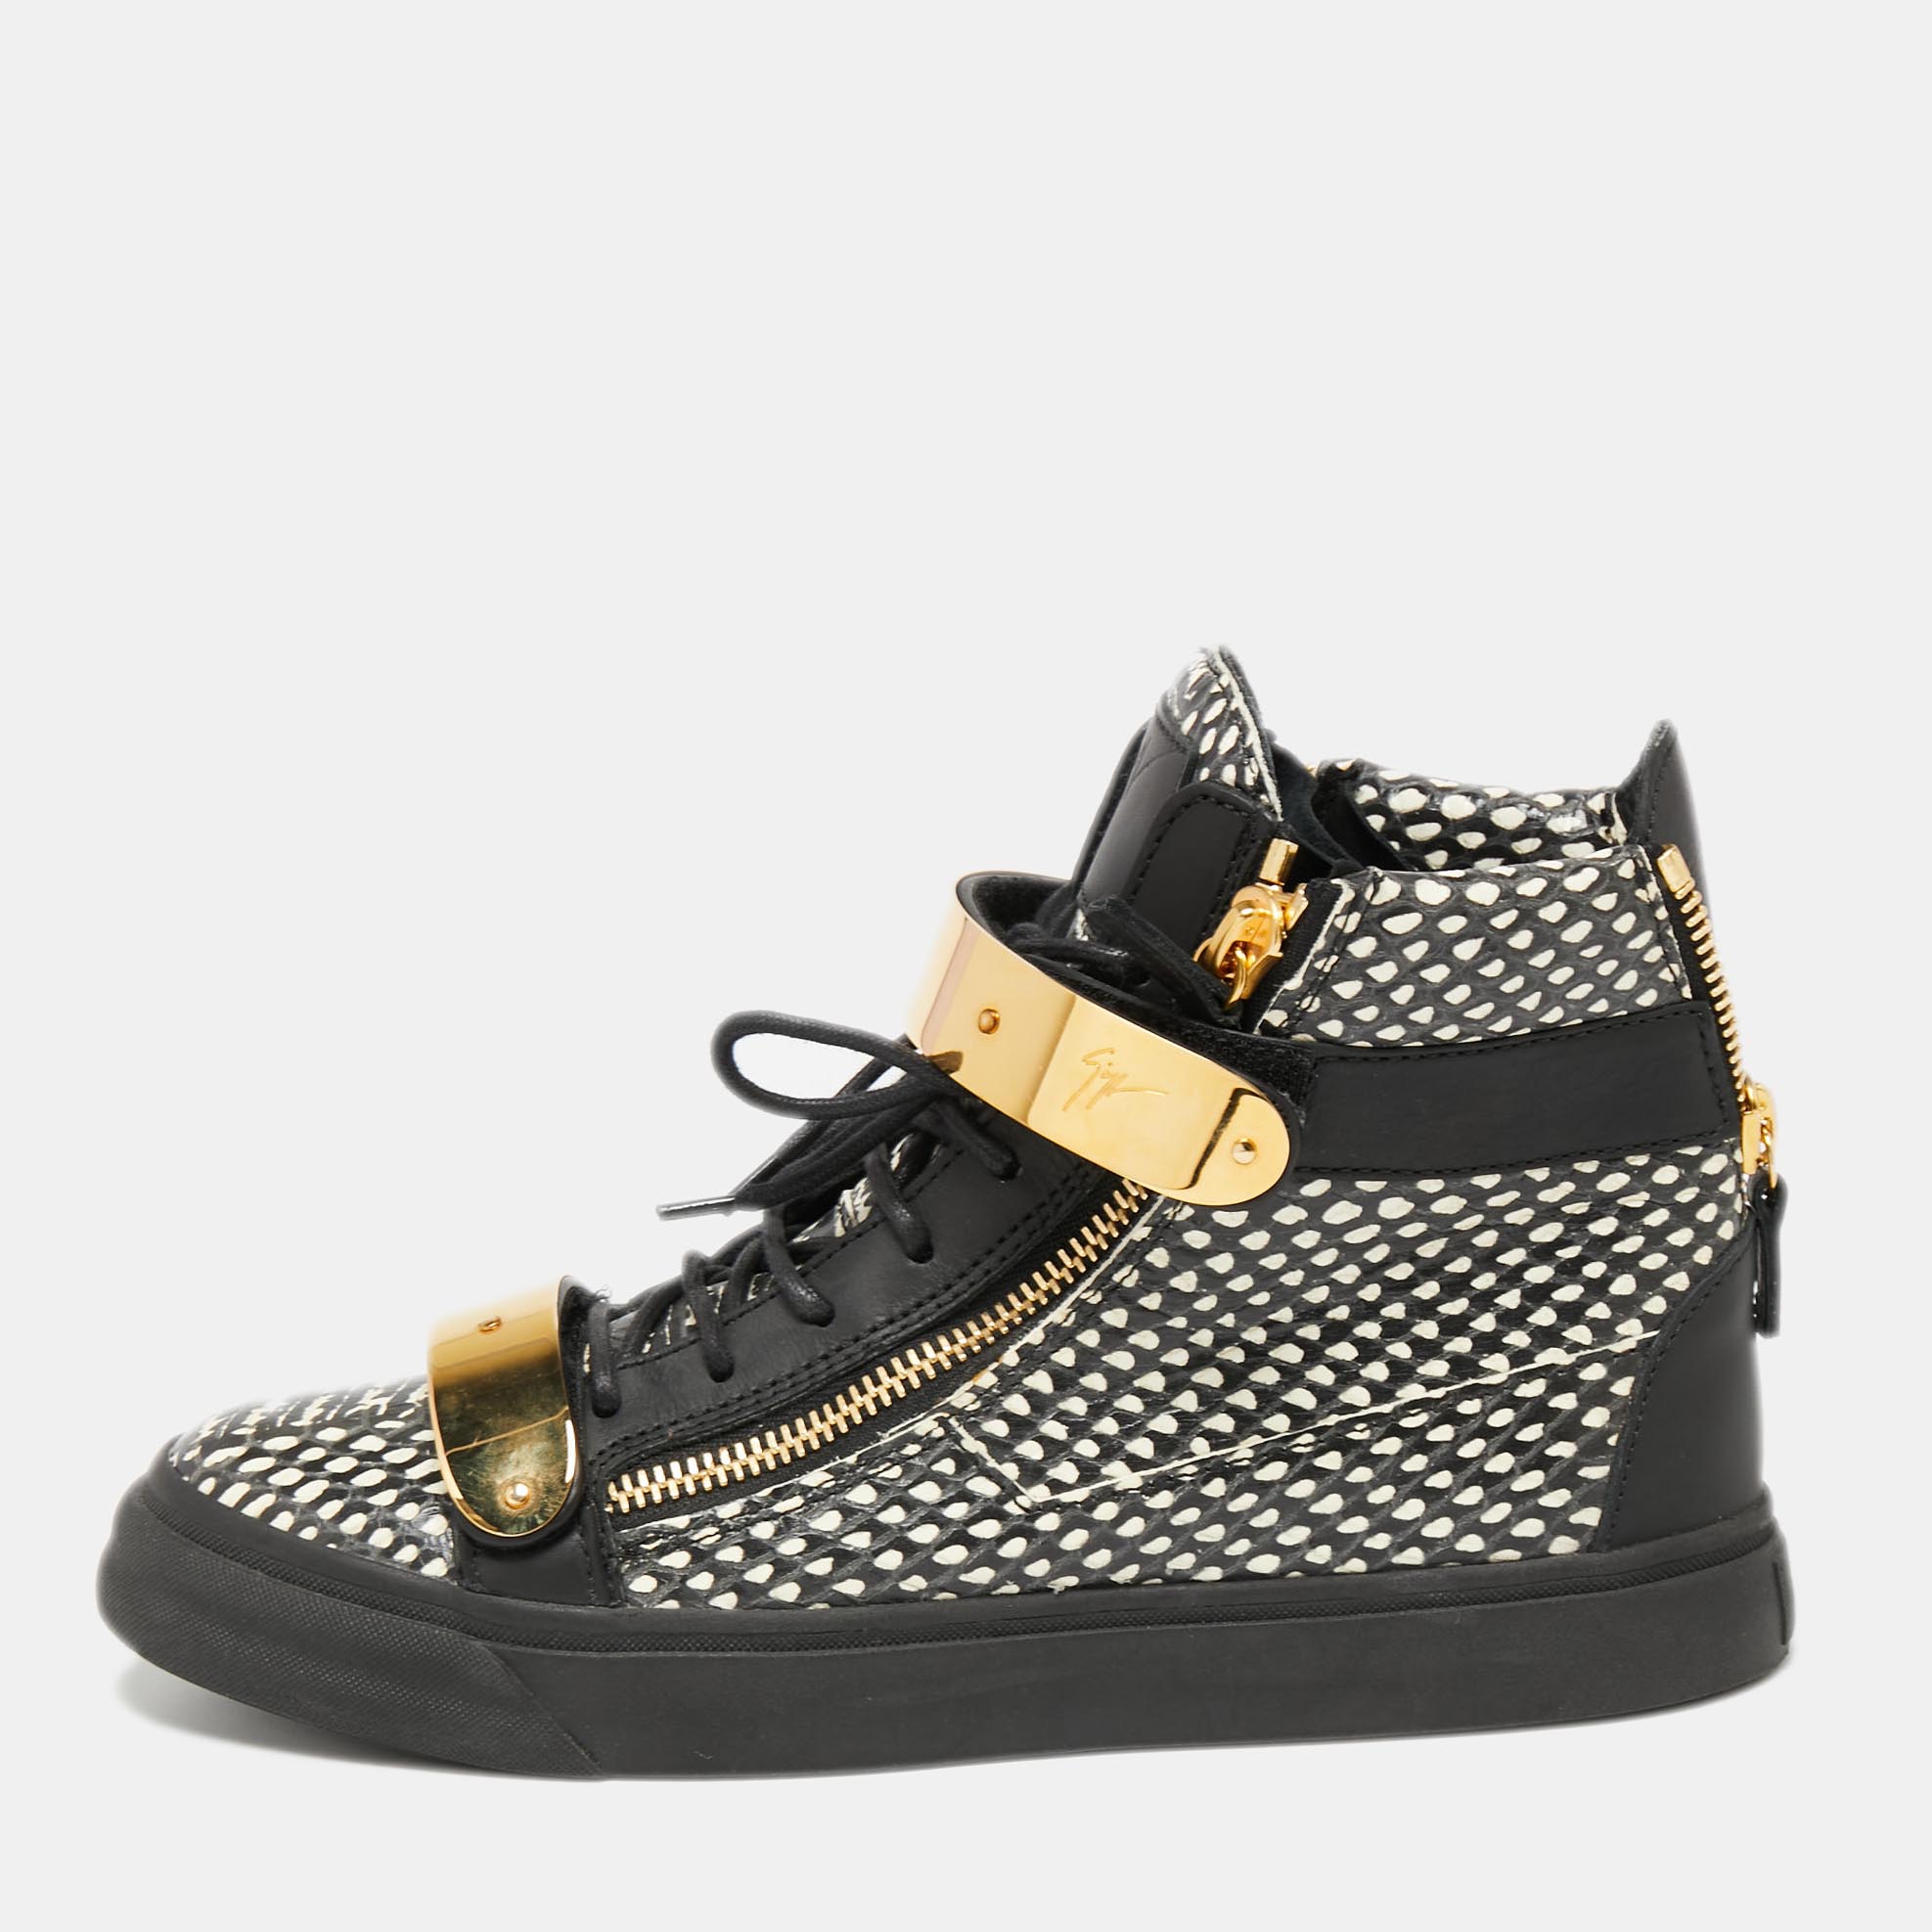 Giuseppe zanotti black/white snakeskin embossed and leather high top double zip sneakers size 40